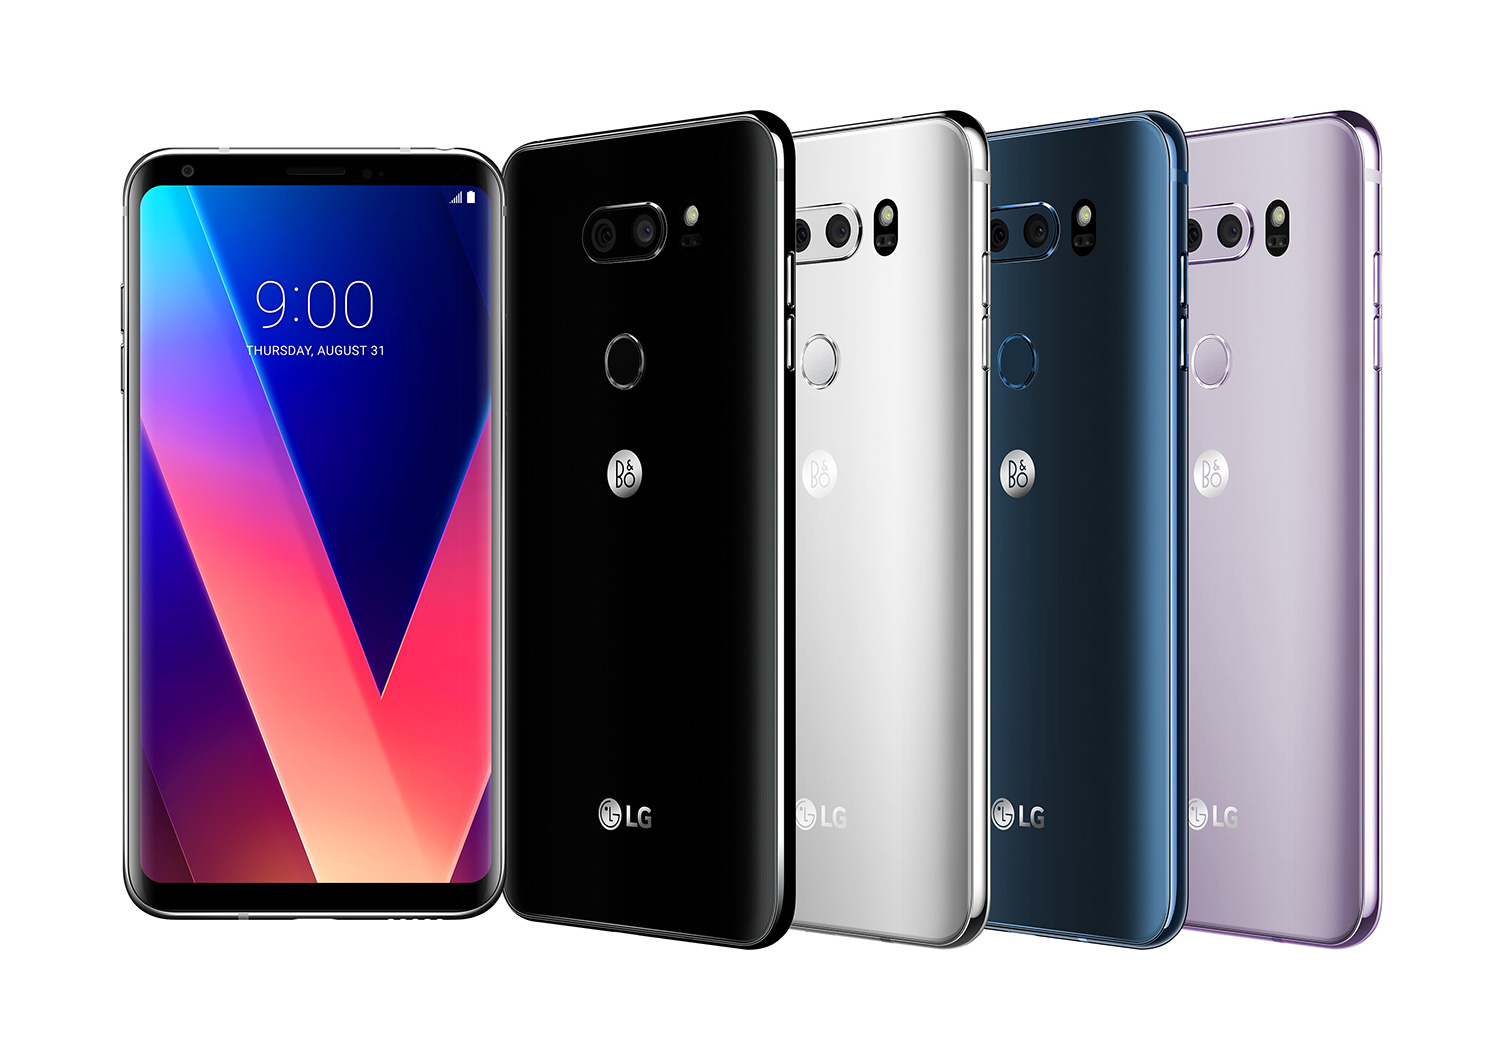 IFA 2017: LG V30 Goes Official with OLED Display